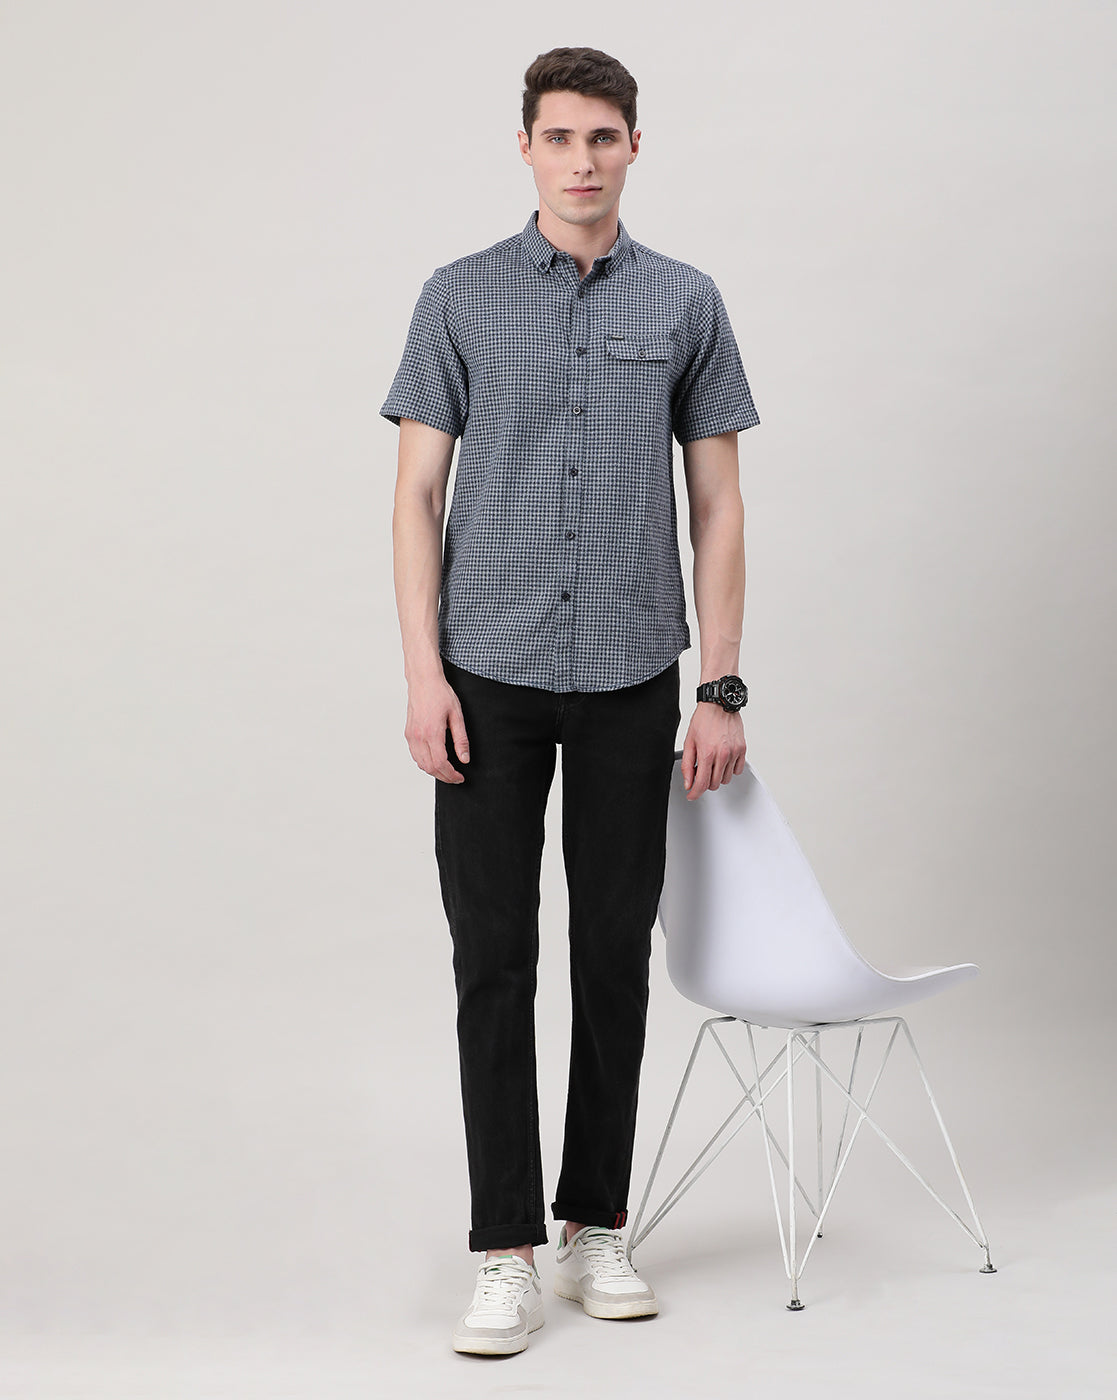 Casual Navy Half Sleeve Comfort Fit Check Shirt with Collar for Men